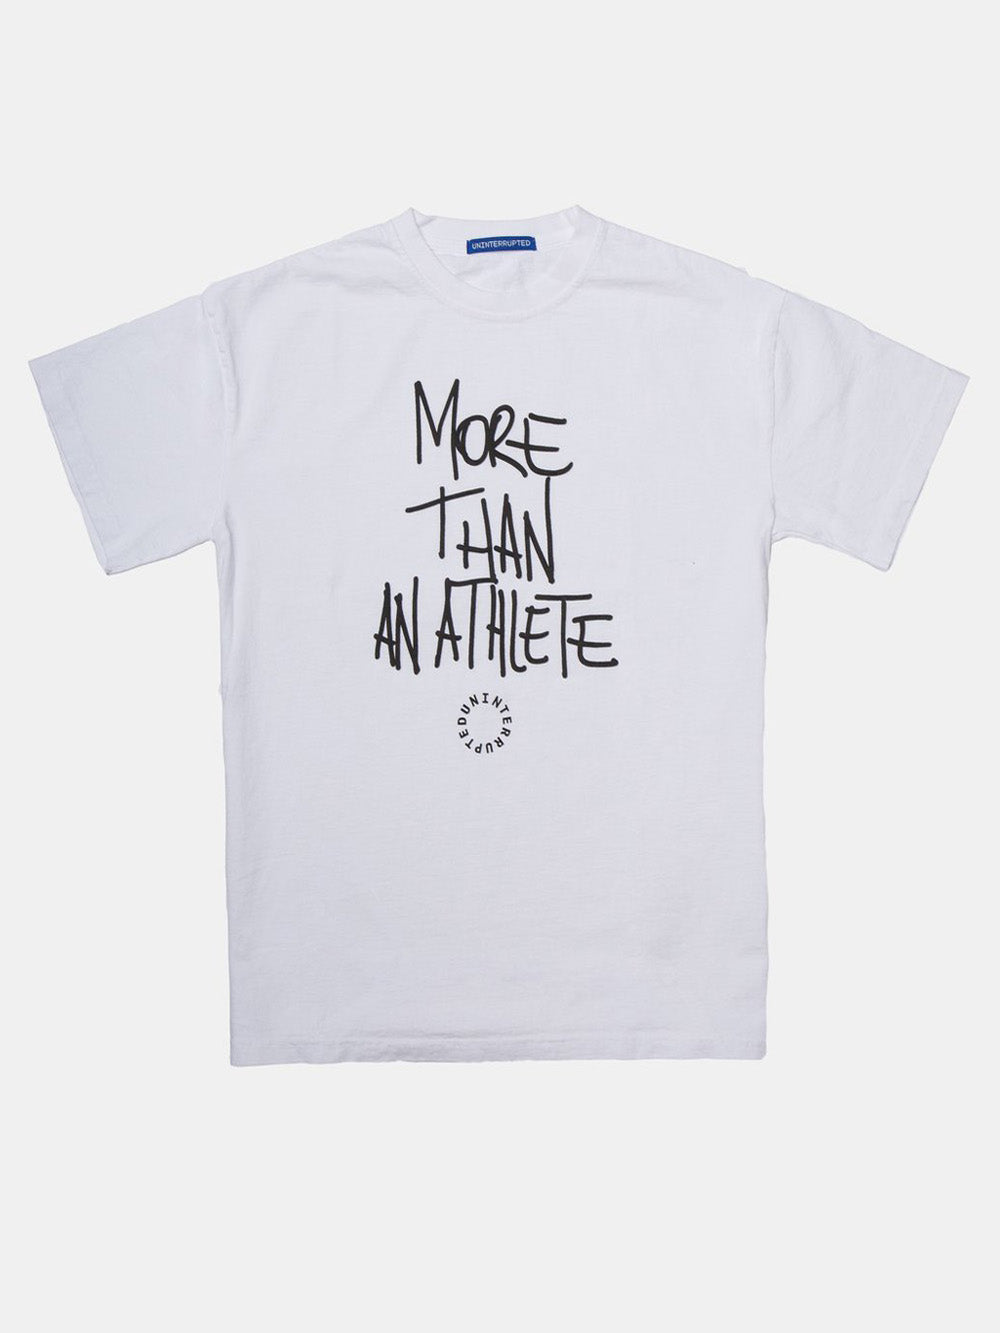 More Than An Athlete Venice Tee White - front of tshirt with writing on it